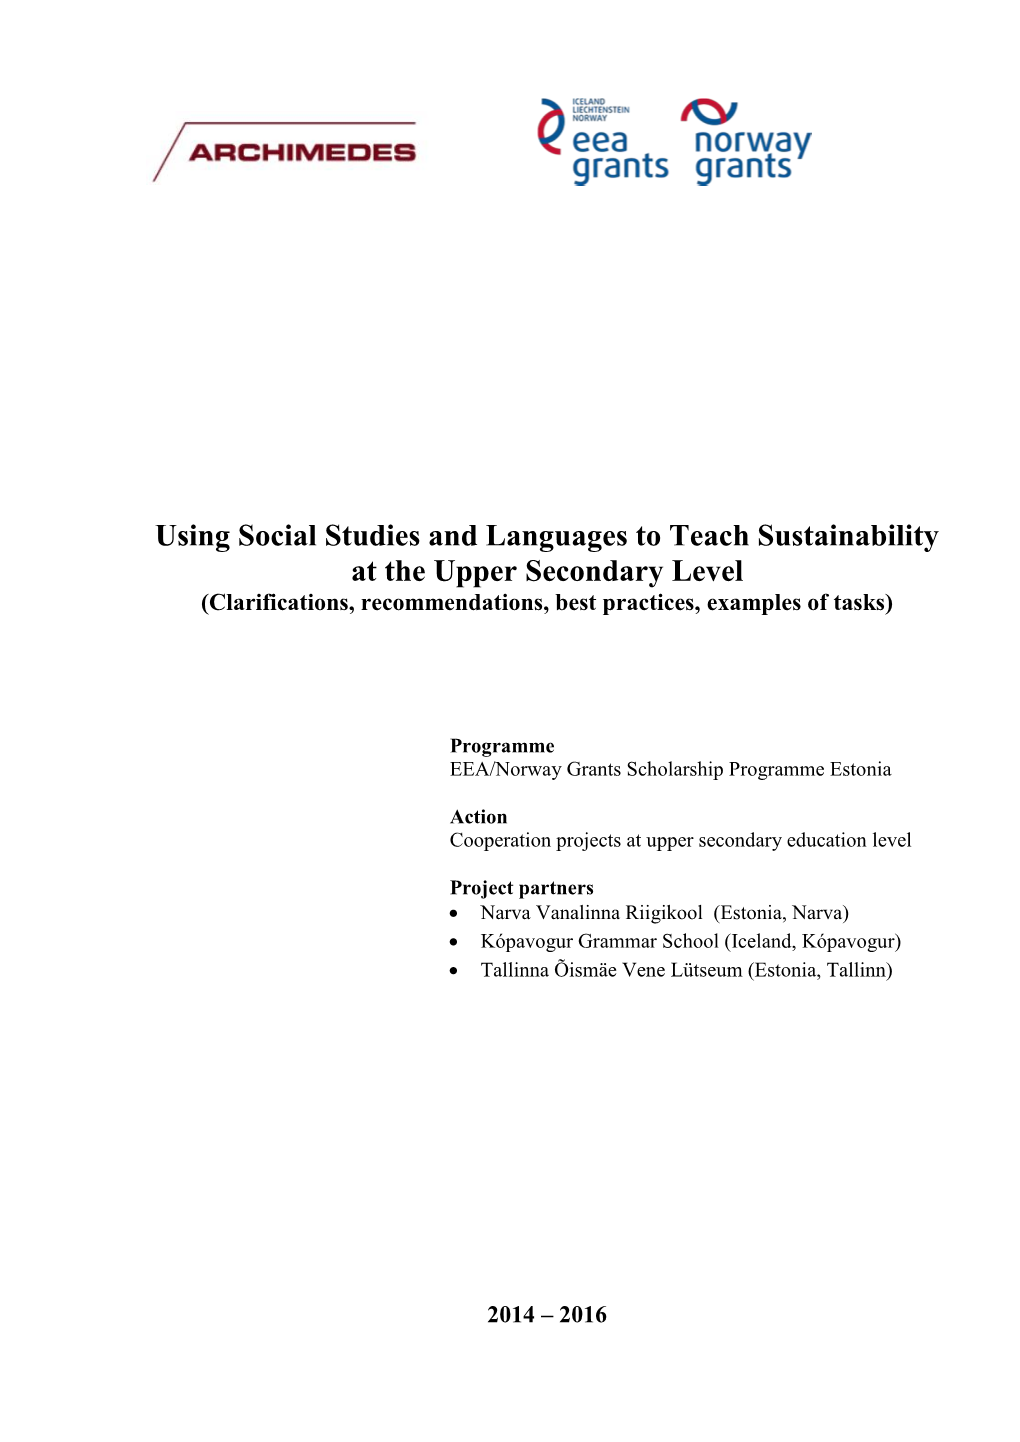 Using Social Studies and Languages to Teach Sustainability at the Upper Secondary Level (Clarifications, Recommendations, Best Practices, Examples of Tasks)